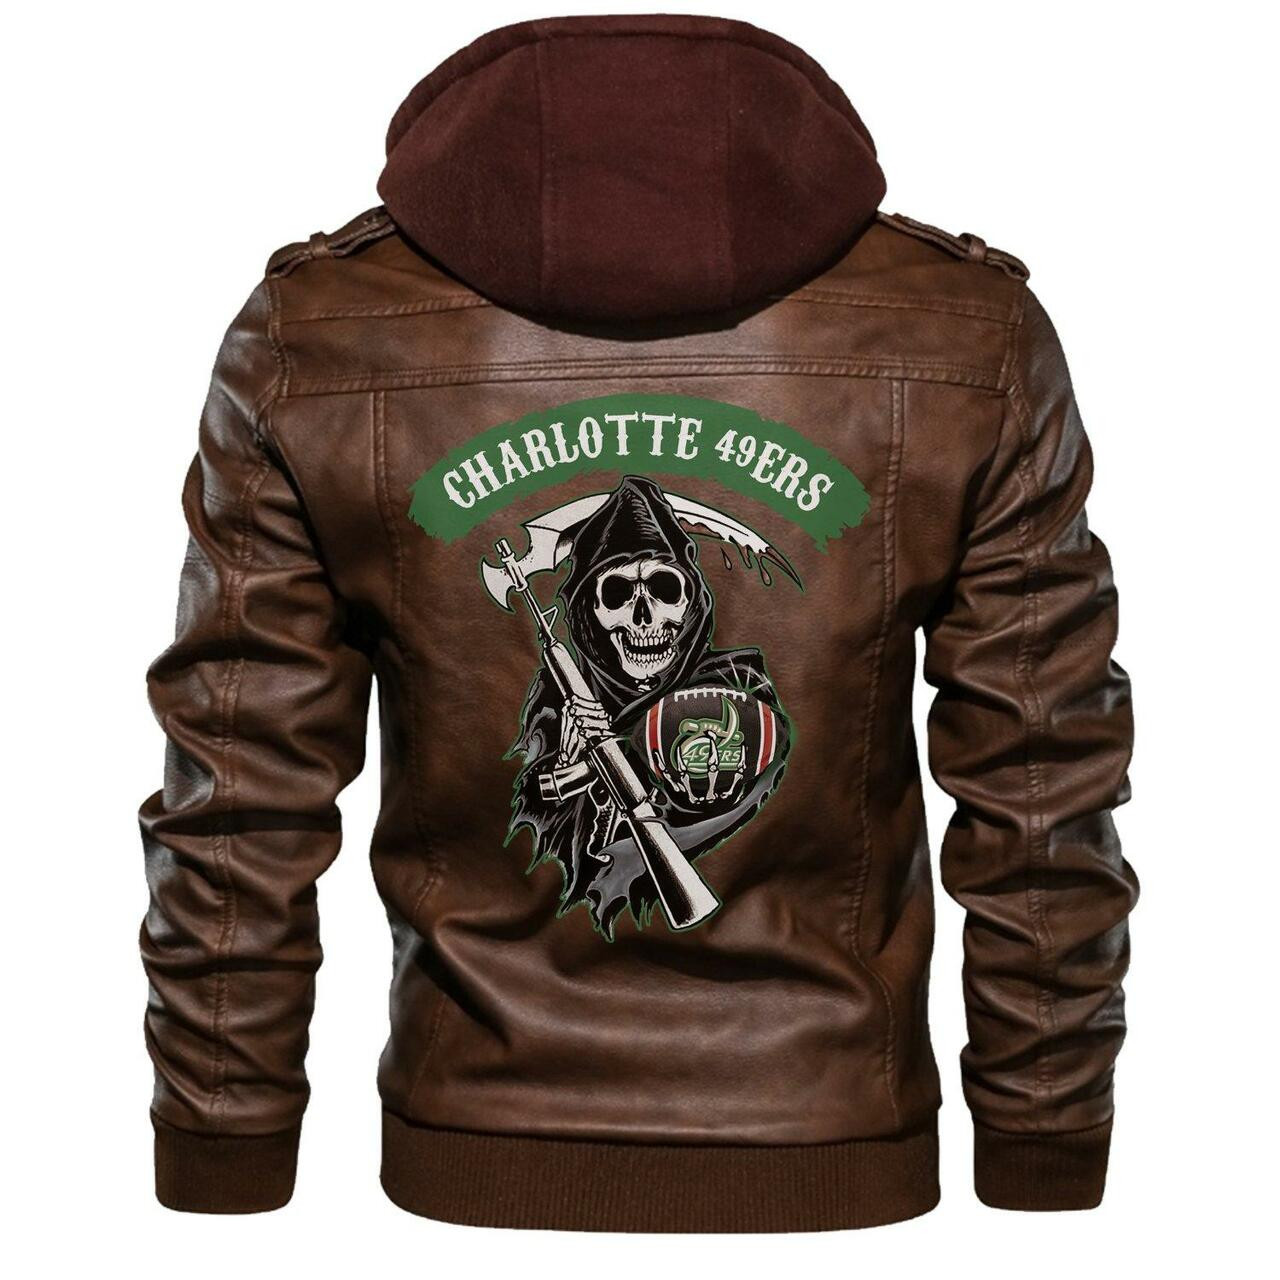 Our store has all of the latest leather jacket 208